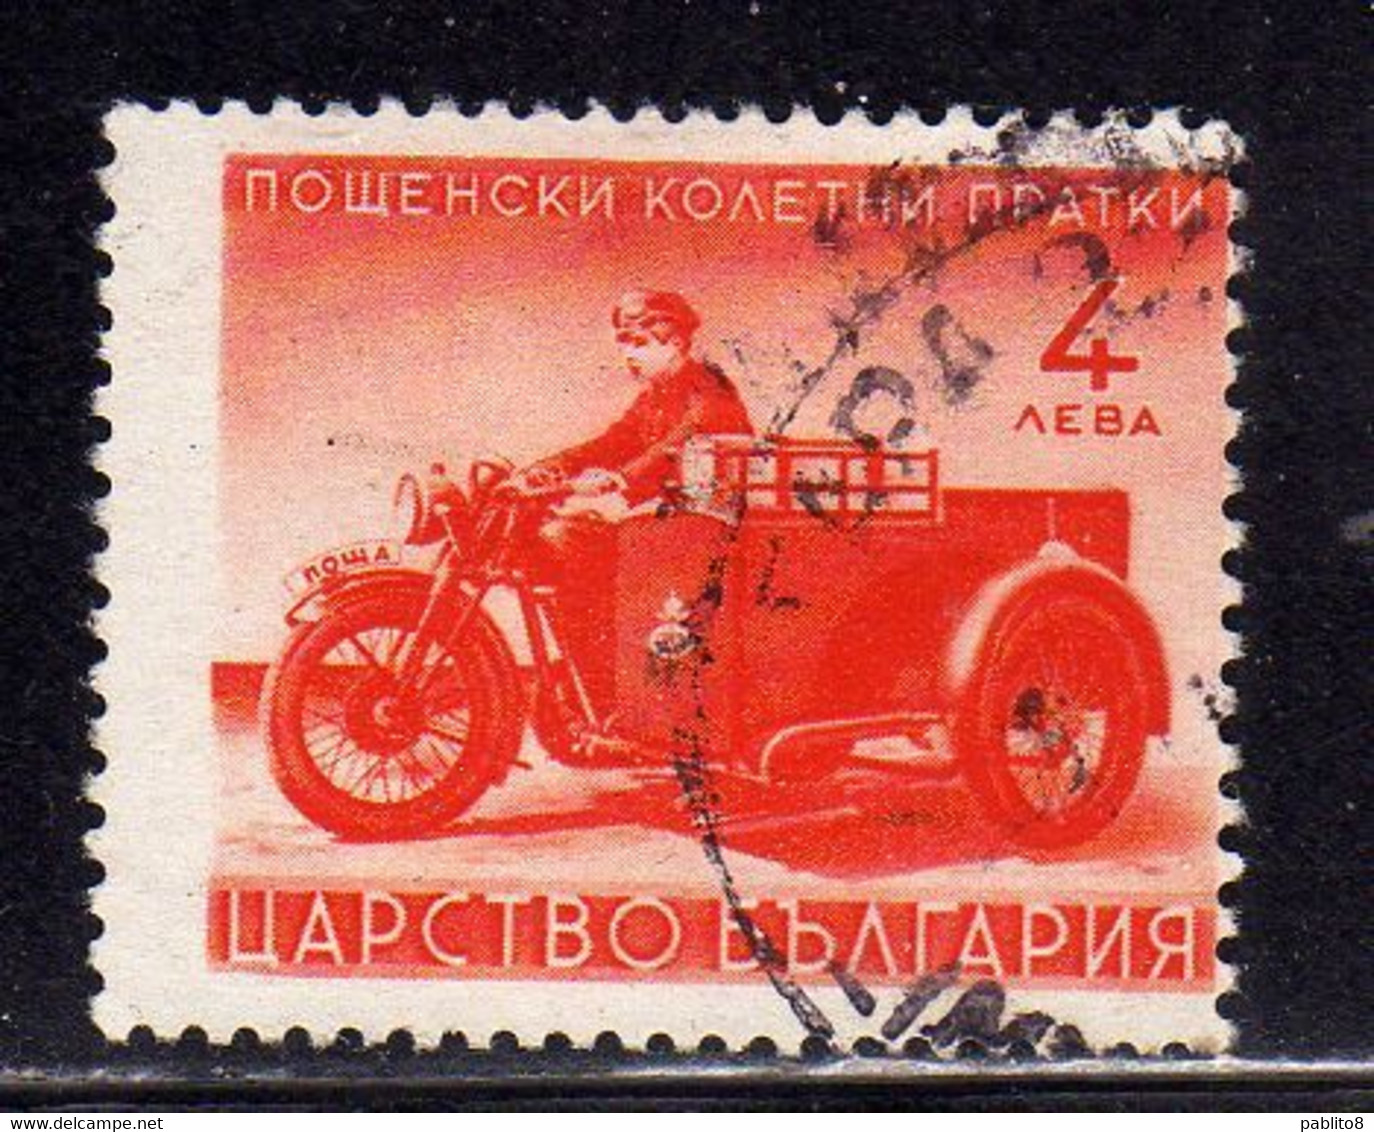 BULGARIA BULGARIE BULGARIEN 1941 PARCEL POST STAMPS PACCHI POSTALI MOTORCYCLE 4L USATO USED OBLITERE' - Official Stamps